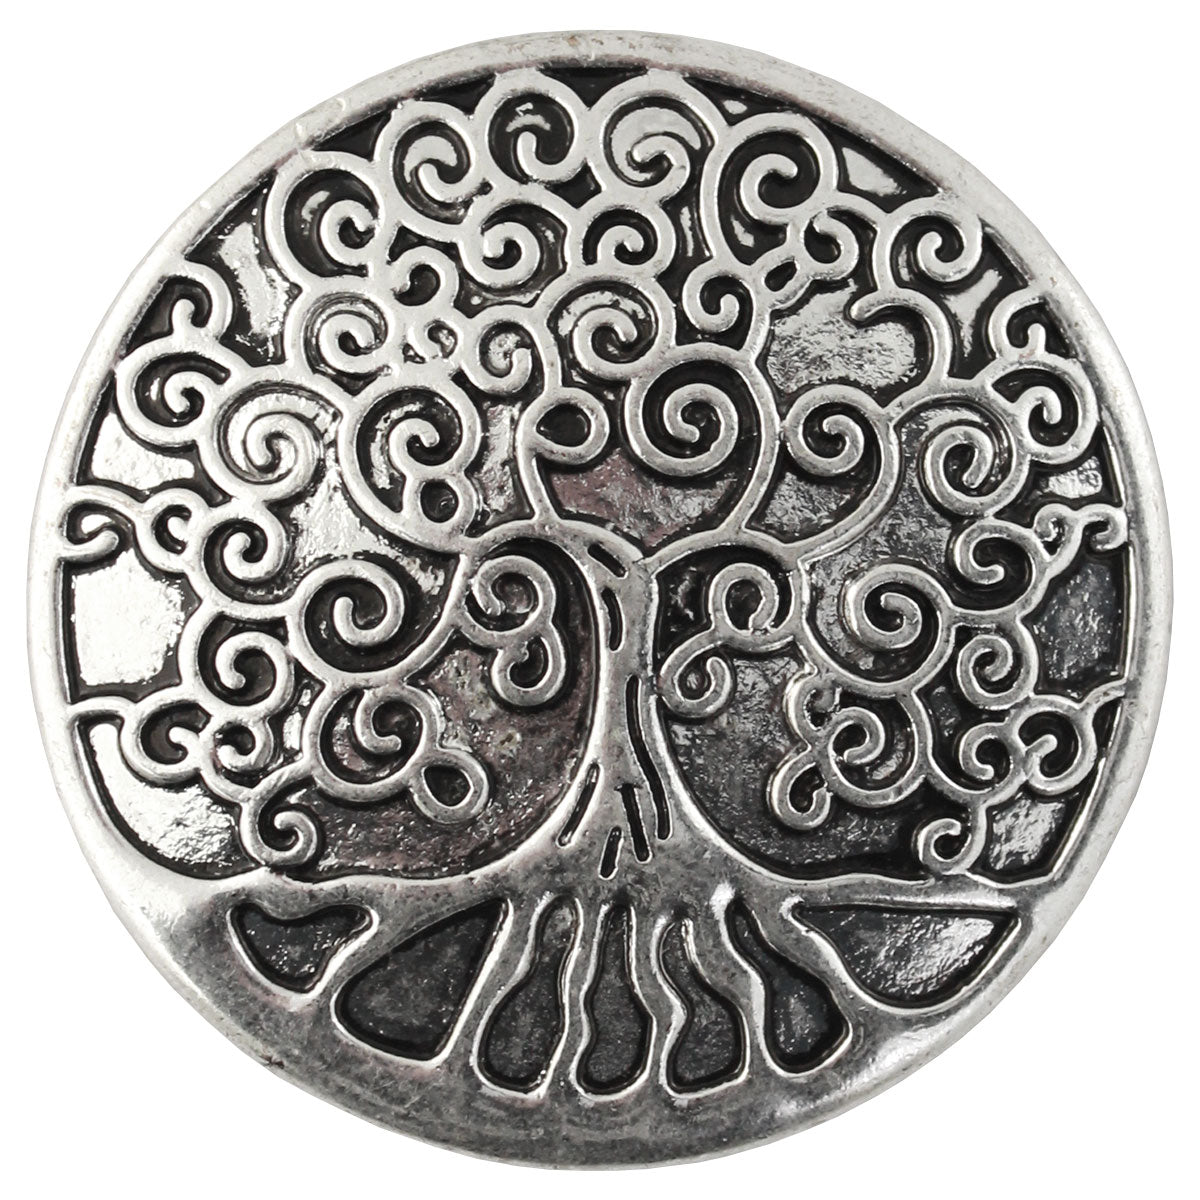 Silver embossed tree of life. Magnetic Brooch for Scarves Artistic Sculptural shapes add a personality to absolutely anything you wish to put your stamp on! The Super Strong Magnet is enough for a jacket lapel! Use to hold a sarong or cardigan together.  Great to adorn a hat or to hold a scarf in place with Fabric Safe Magnet.